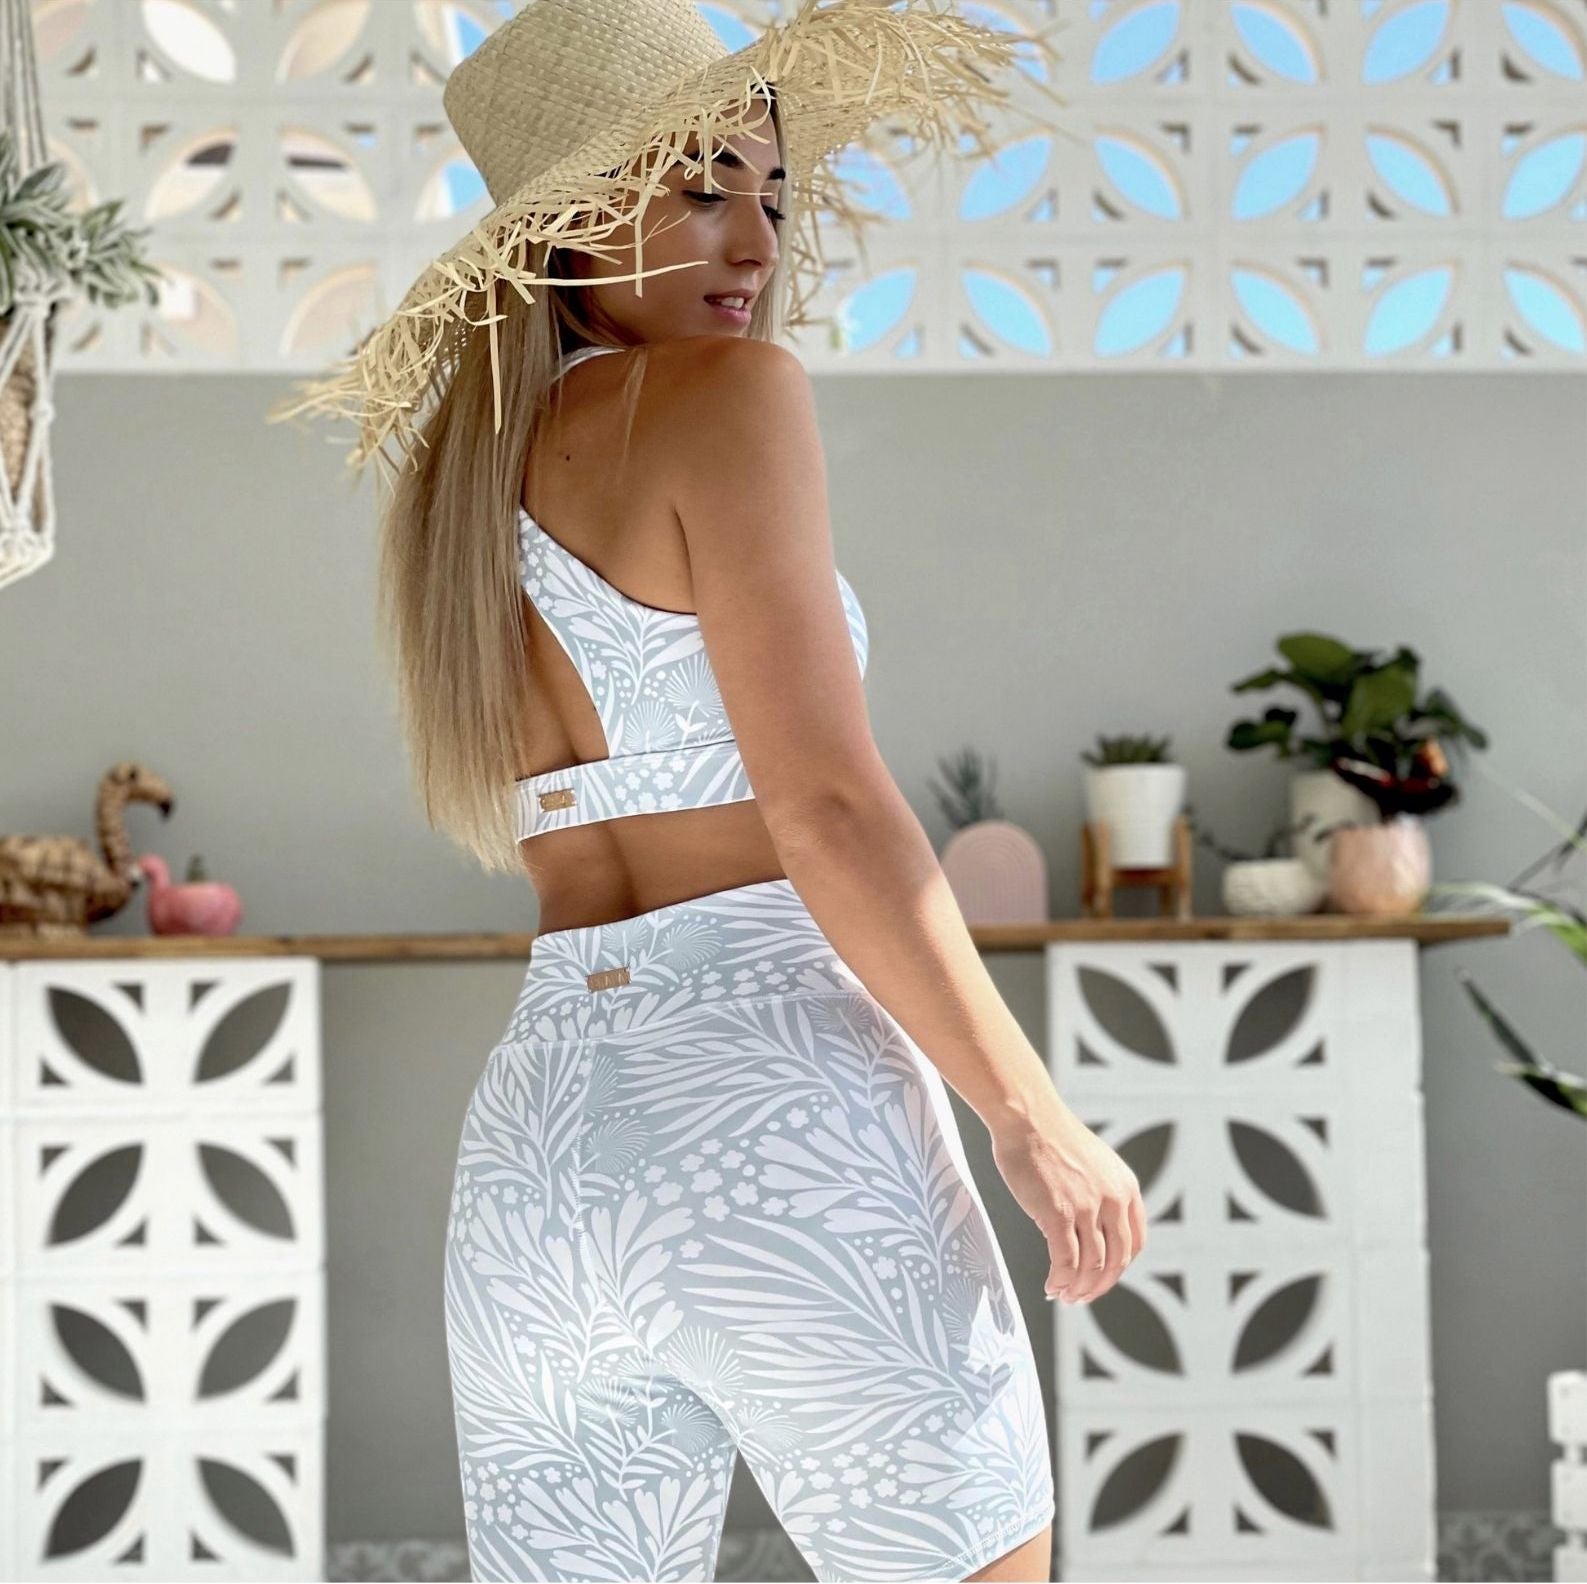 Australian ethical and sustainable activewear matching set made from recycled plastic materials. Light grey and White floral print bike shorts